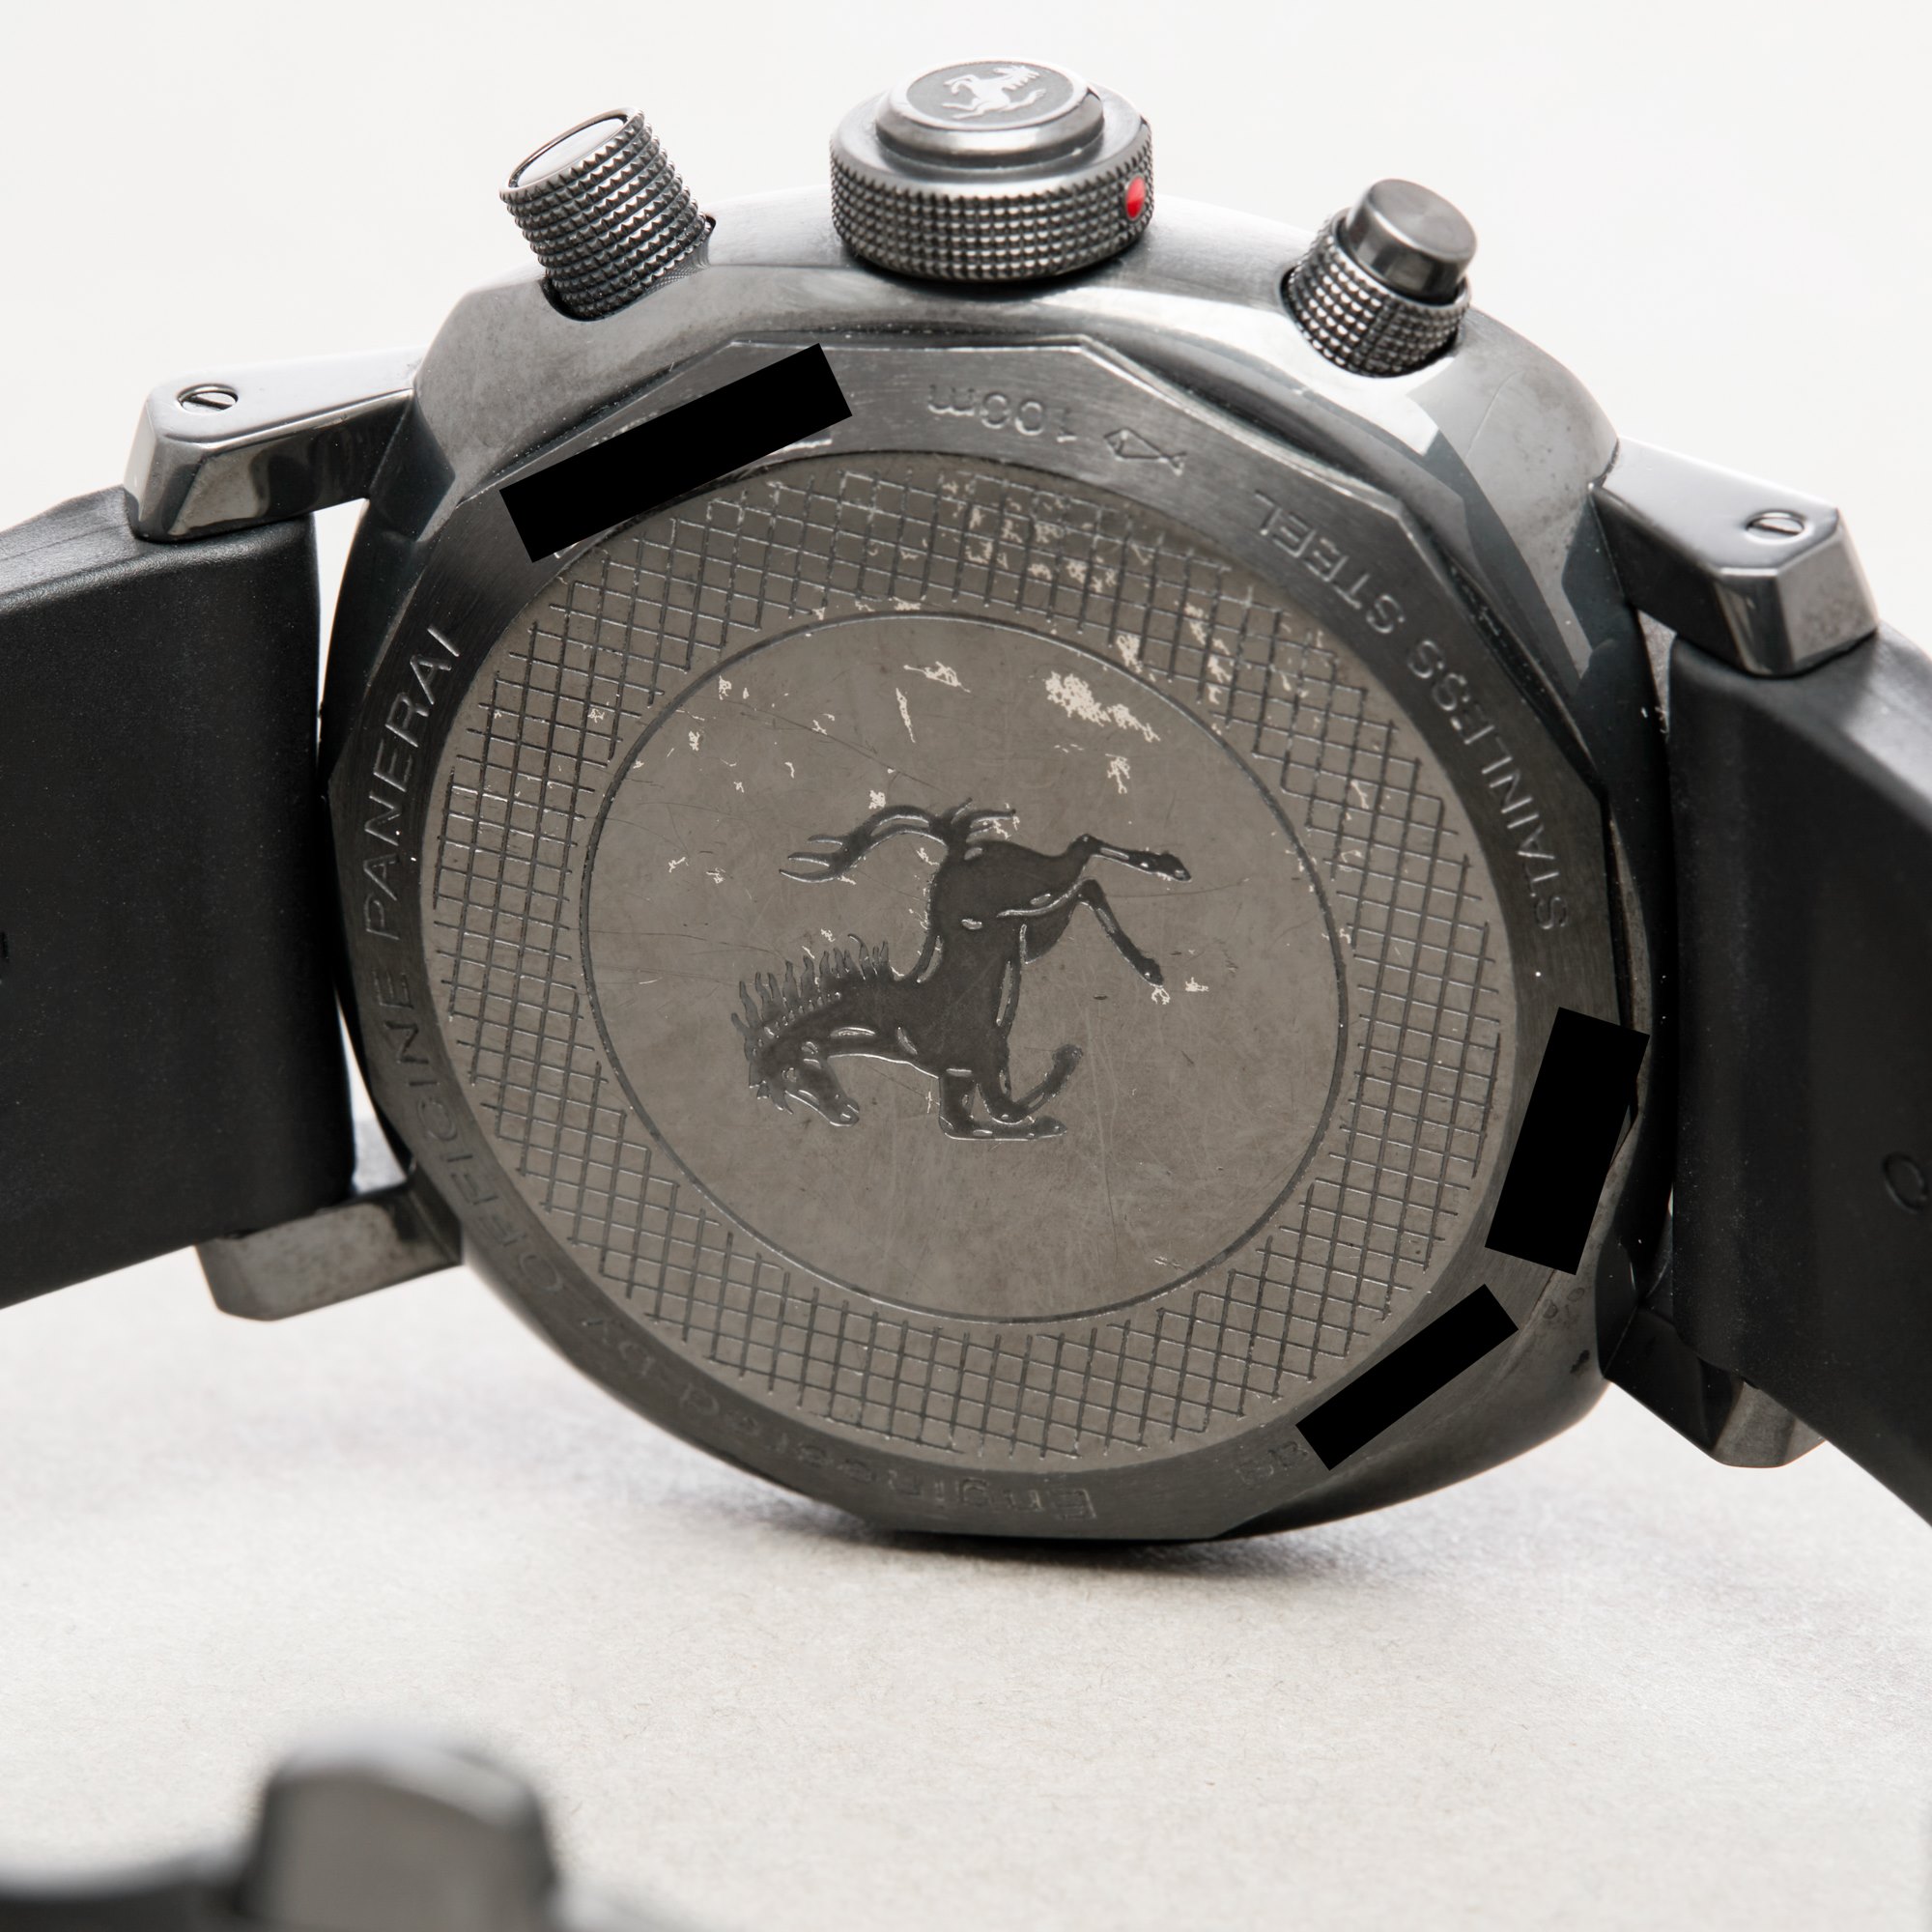 Panerai Ferrari Limited edition of 100 pieces Dlc Coated Stainless Steel FER00038